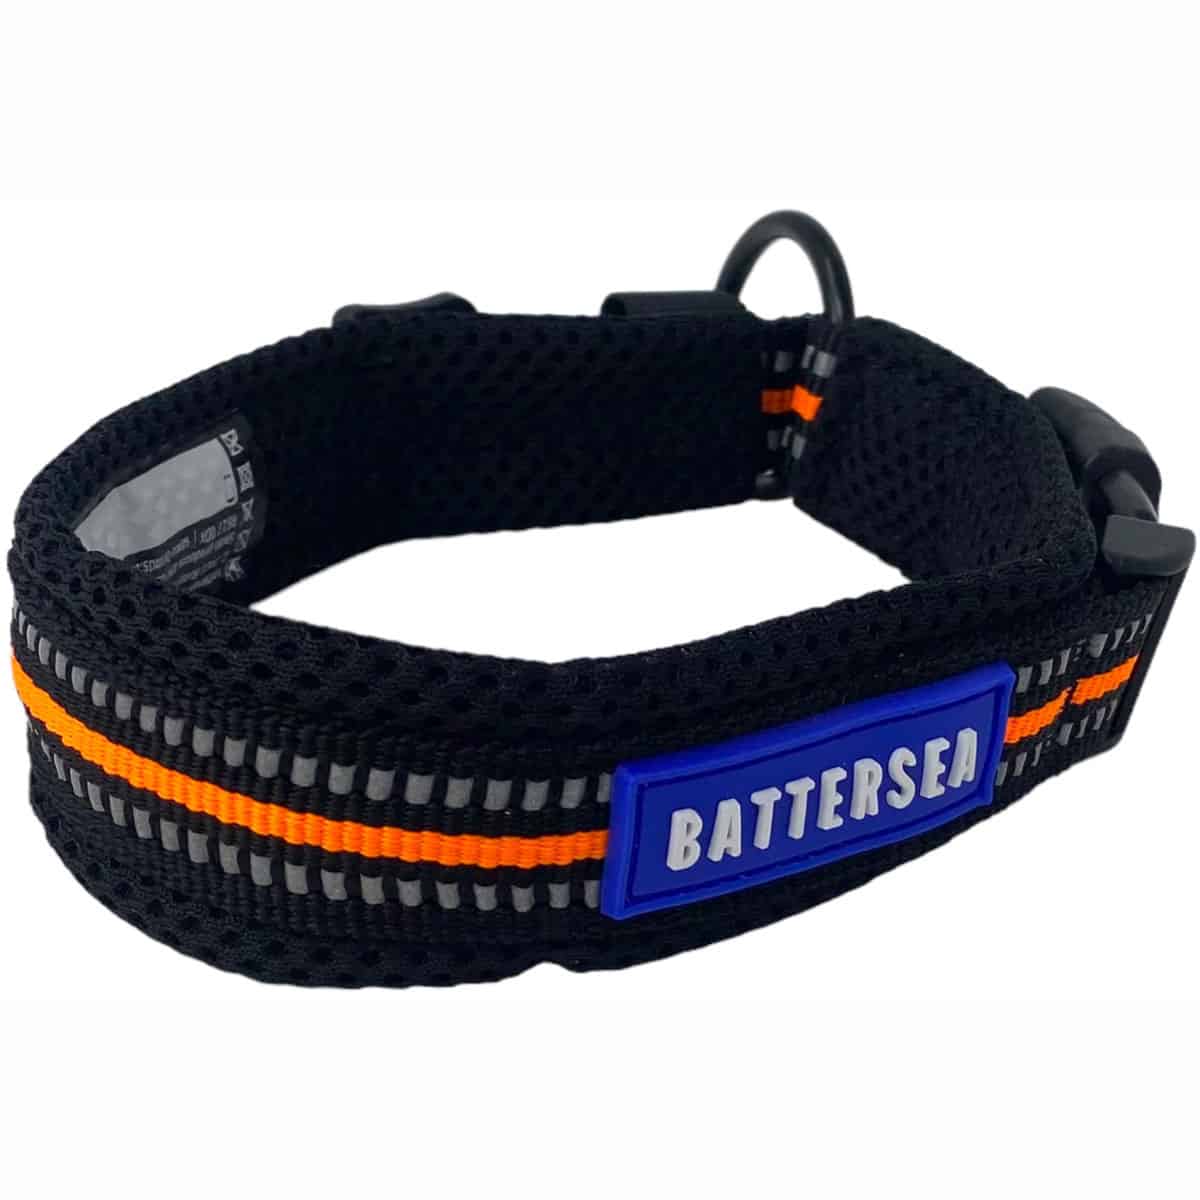 The Battersea Reflective Dog Collar: Let your furry friend shine with the eye-catching Battersea Reflective Dog Collar - 45 deg top 